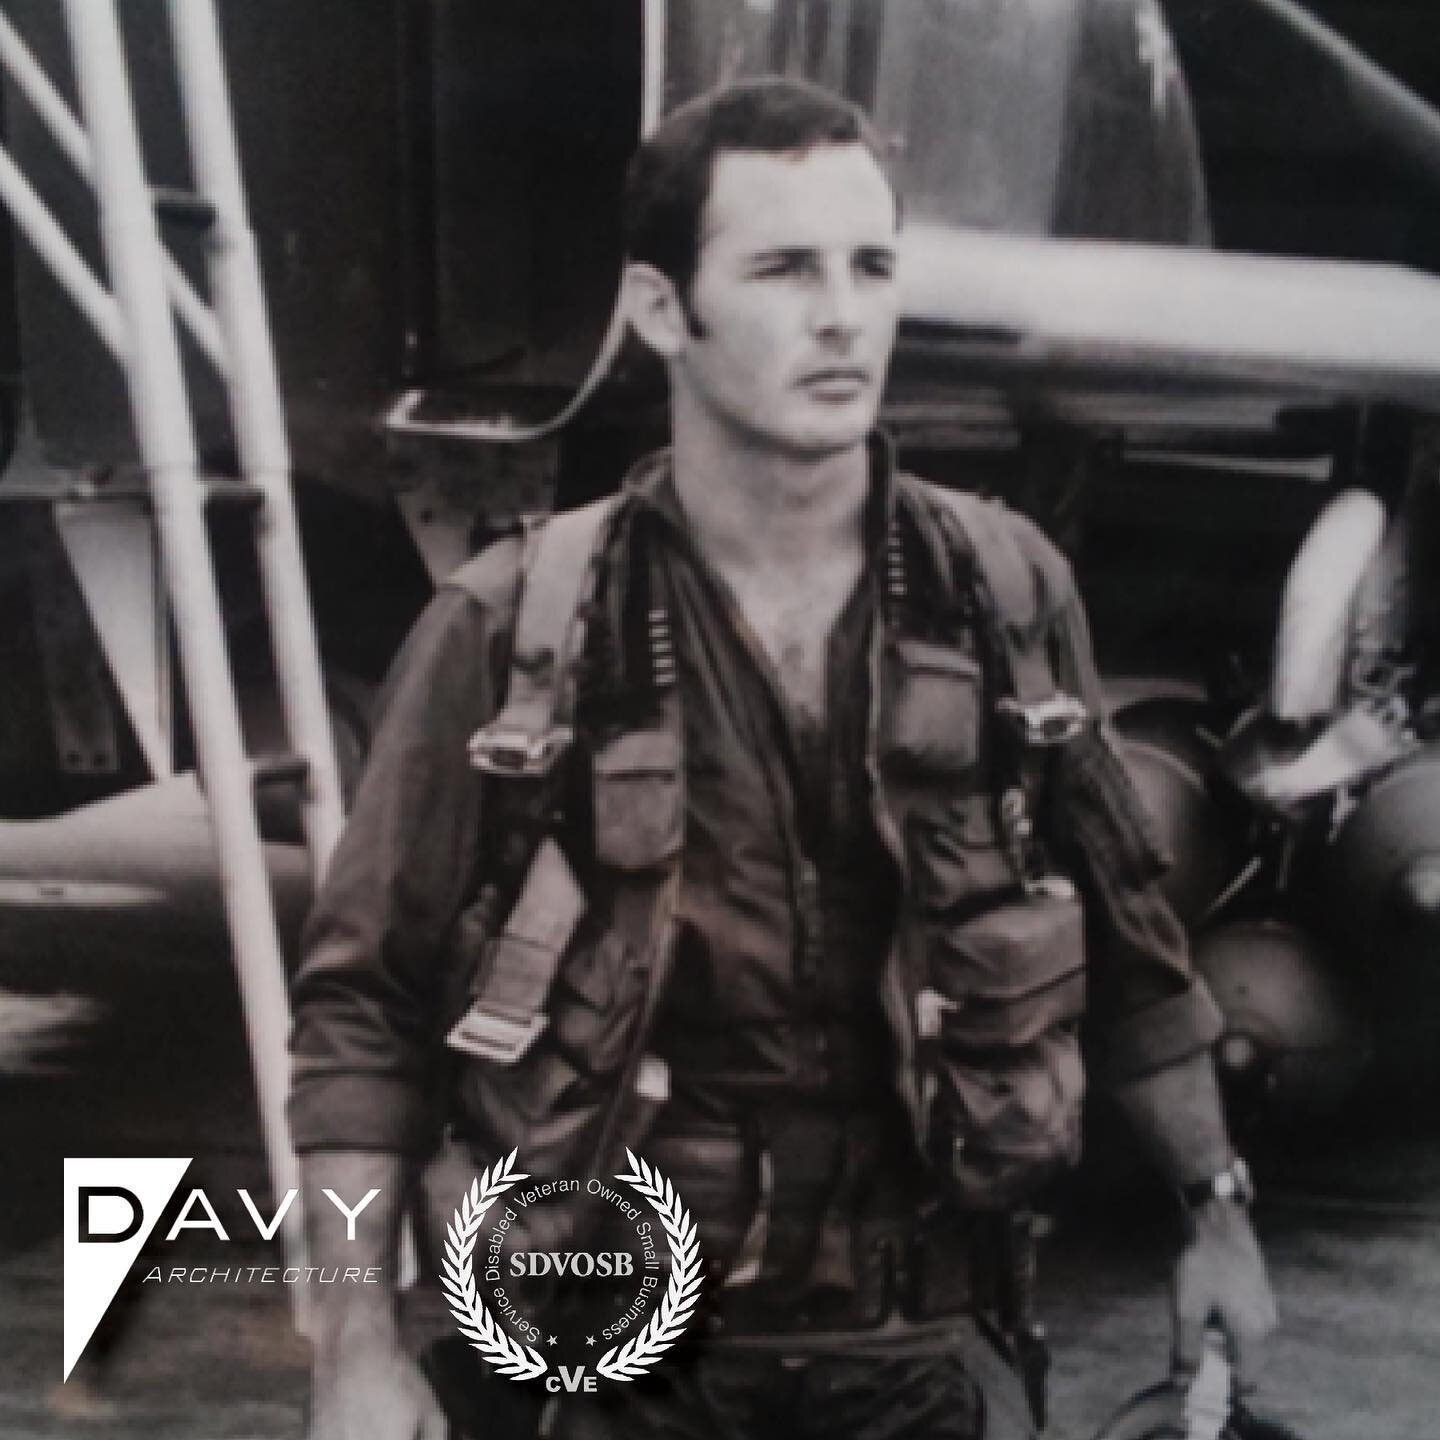 We want to express our gratitude to Veterans, thank you for your sacrifices and selfless commitment to our country. 🇺🇸 Our very own Ric Davy is a Veteran of two wars, and was the recipient of three Distinguished Flying Crosses as an Air Force Pilot